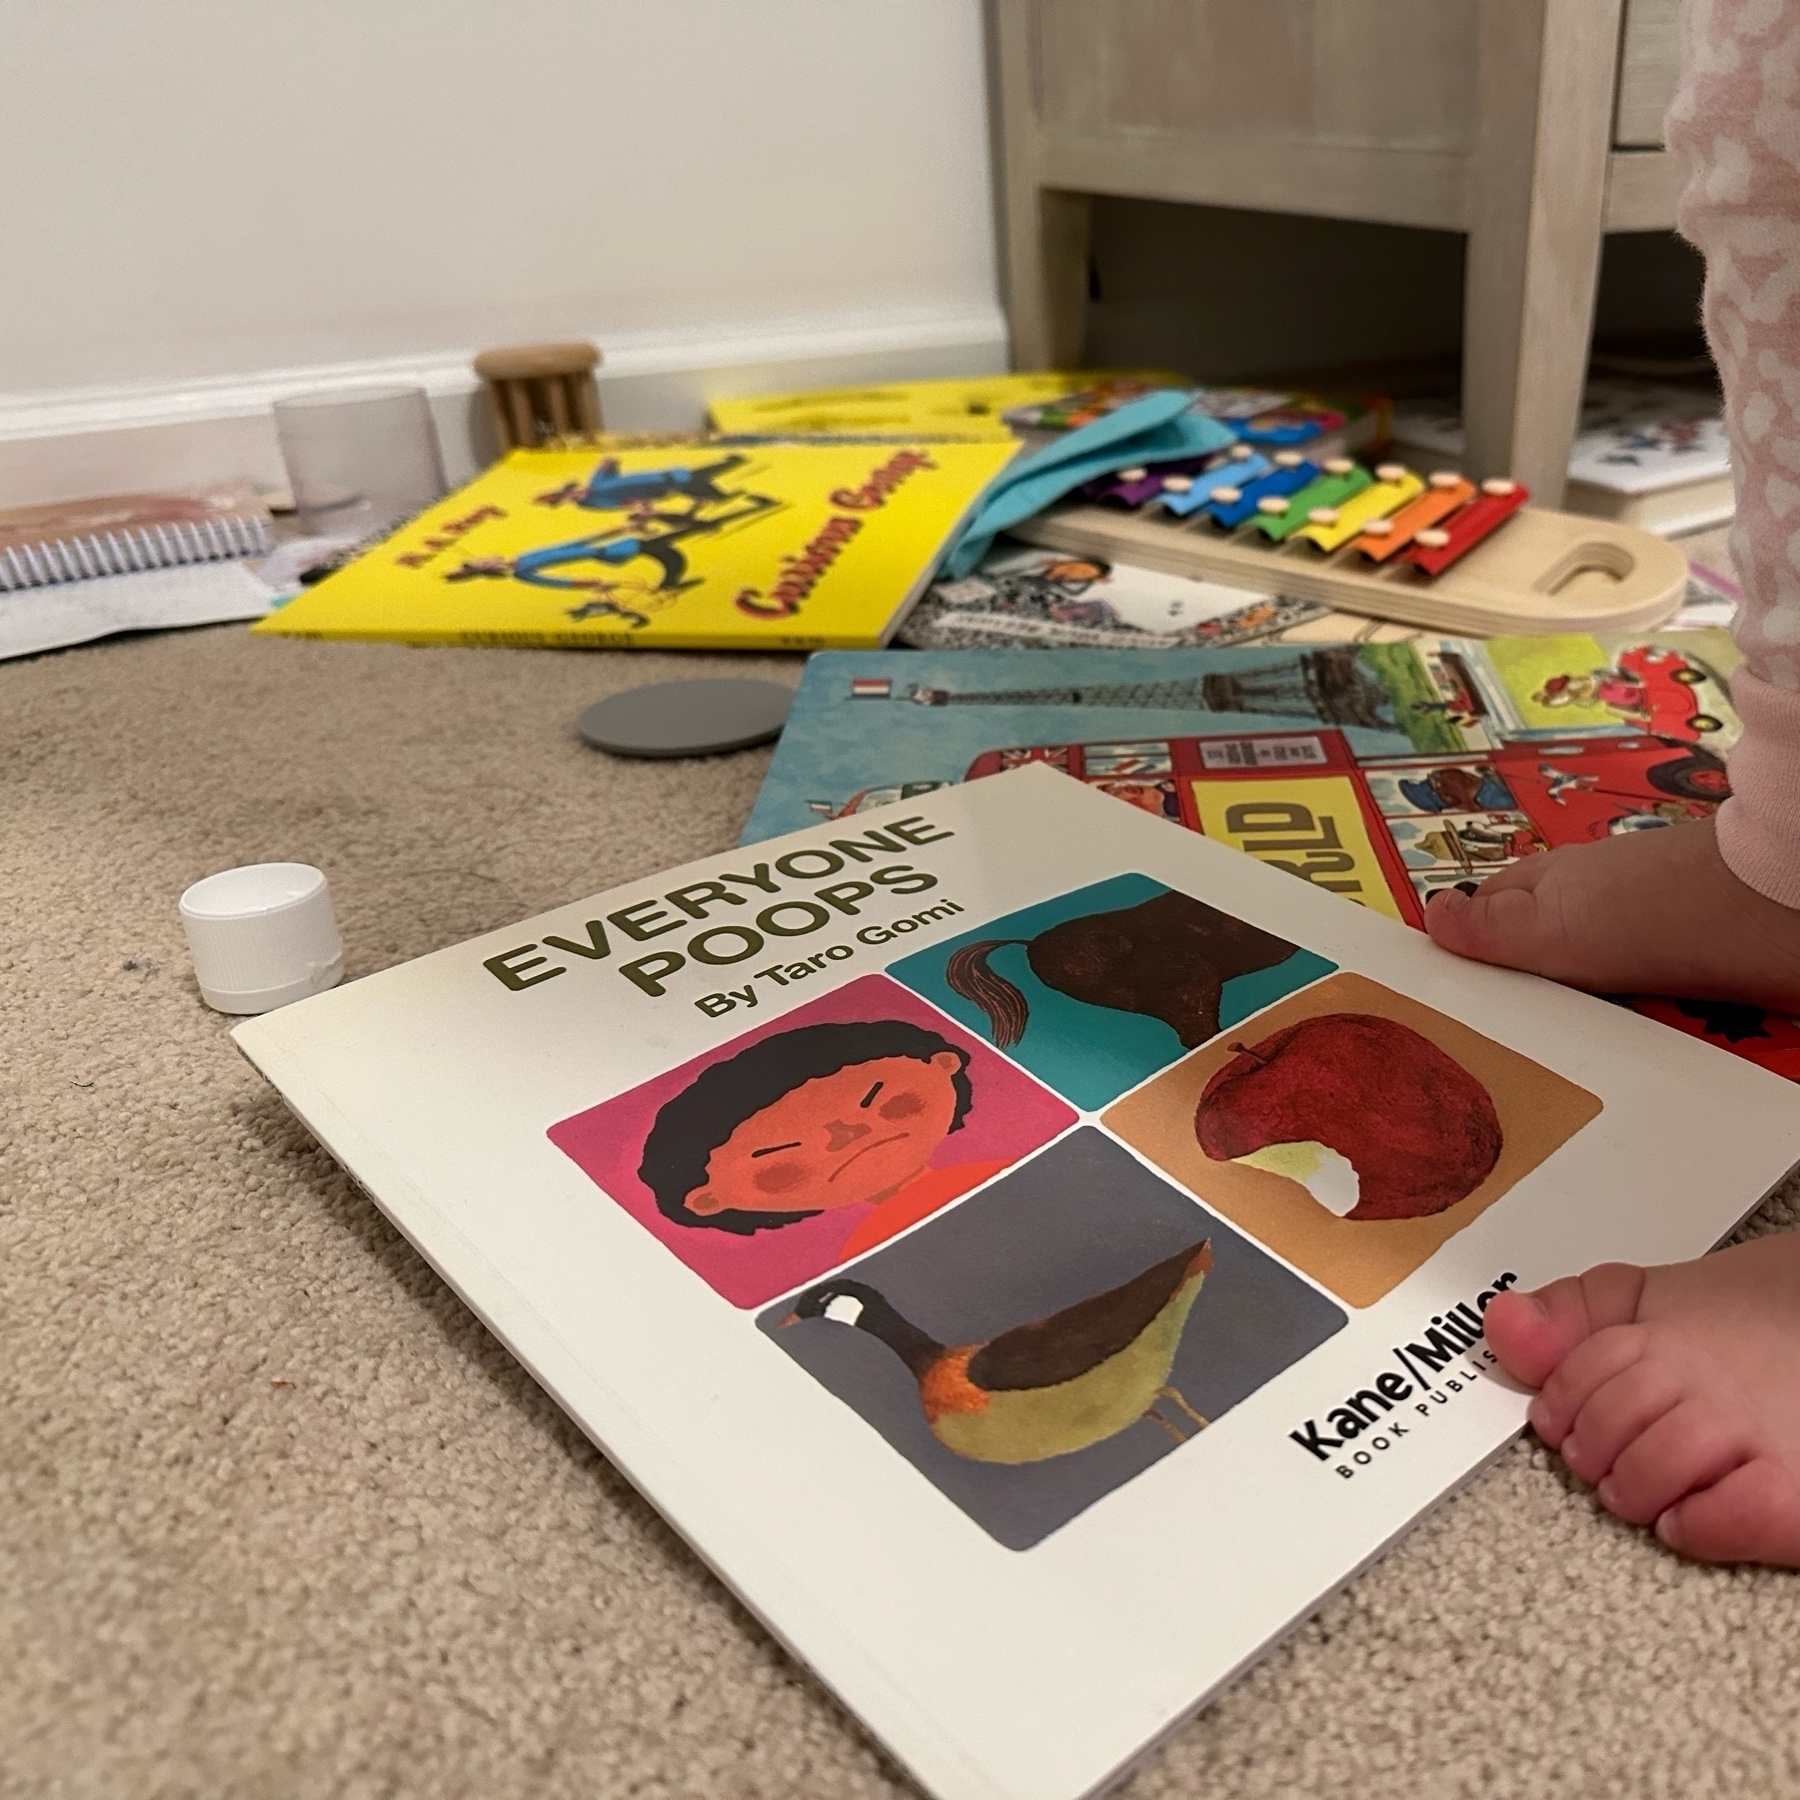 Photo of a stack of books with "Everyone Poops" book on top, with toddler's feet pictured to the right.